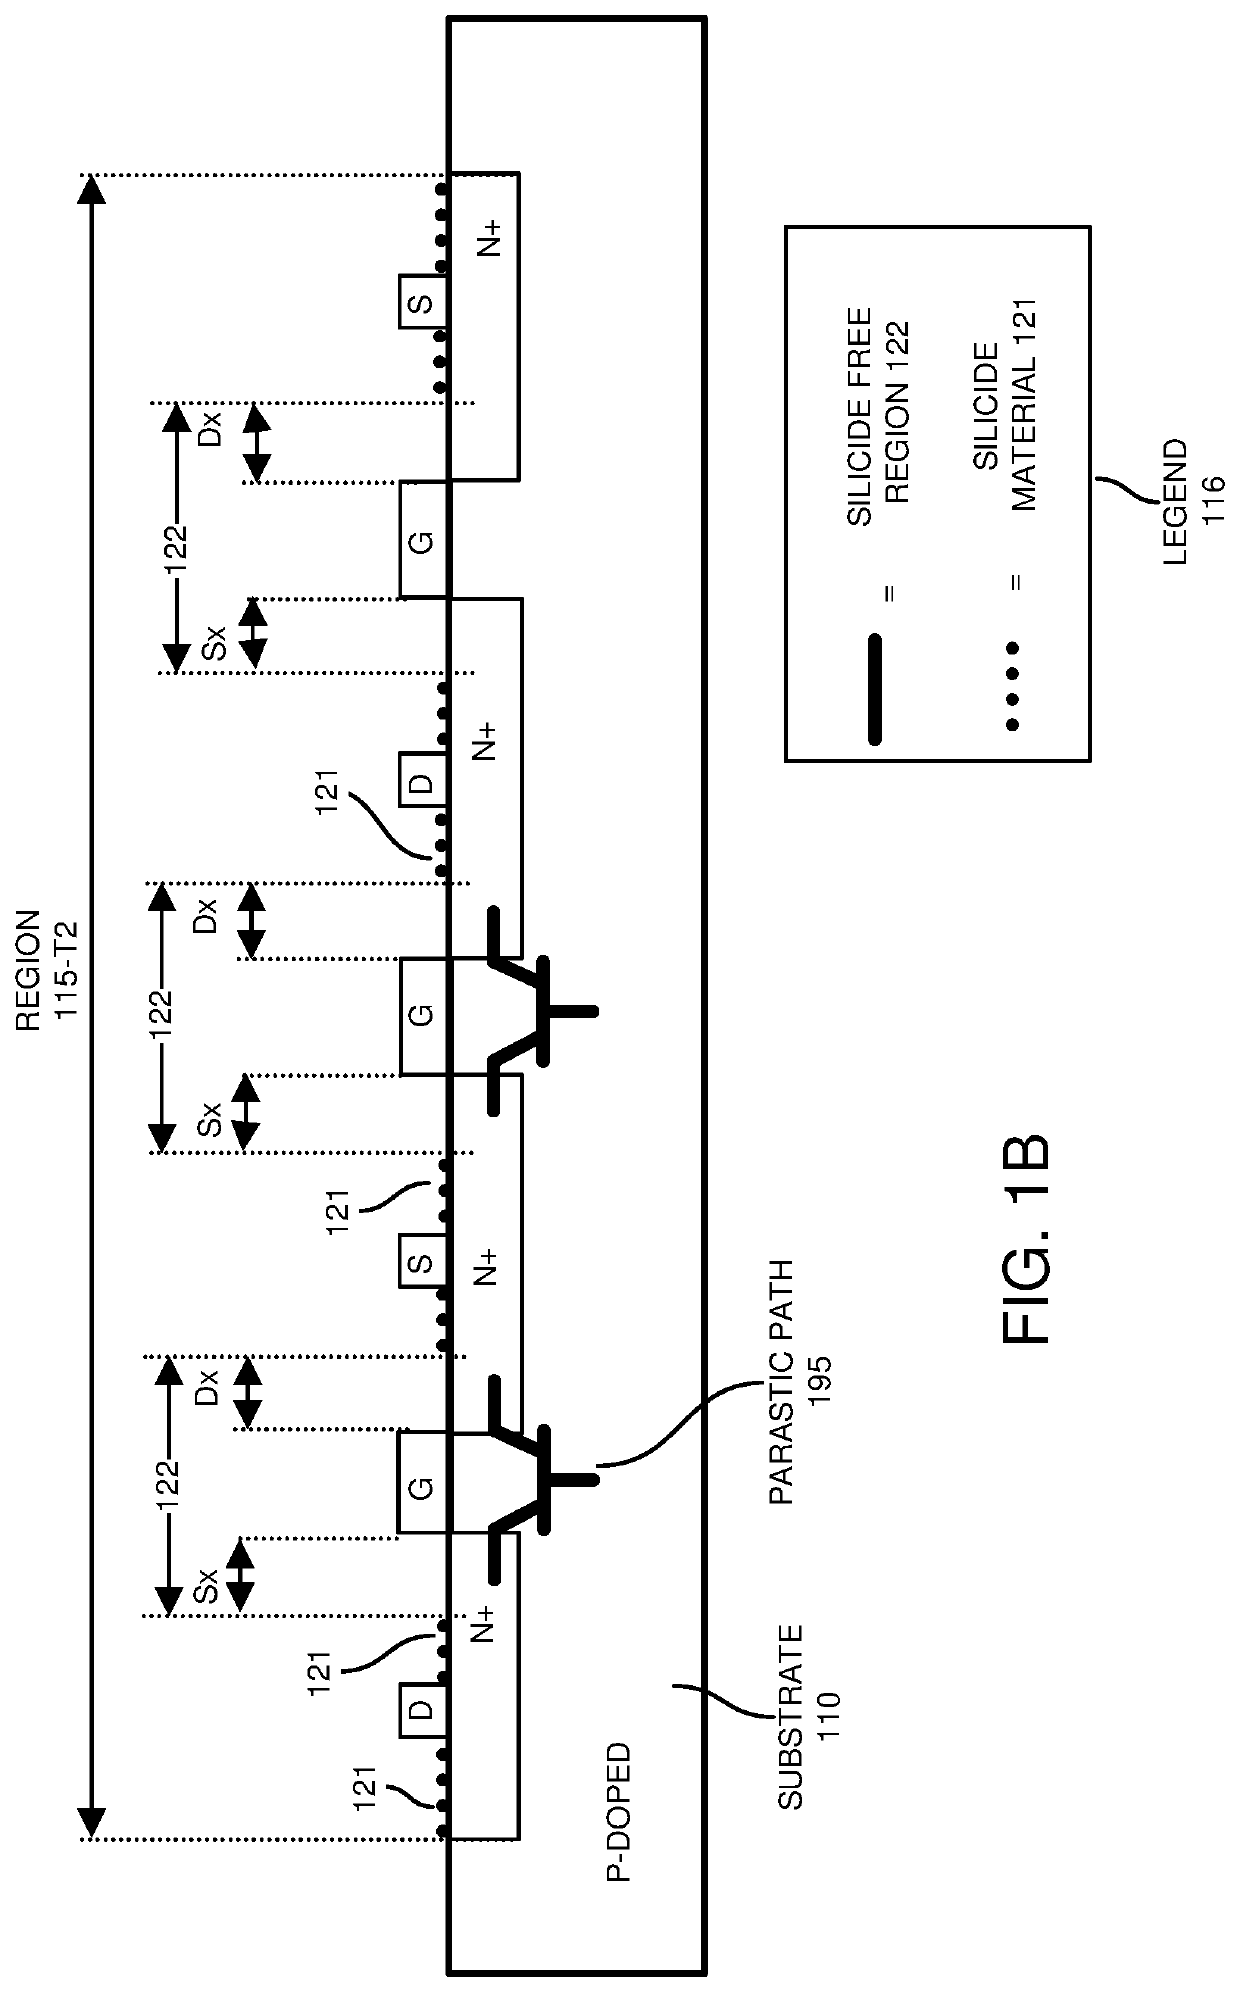 ESD protection in an electronic device